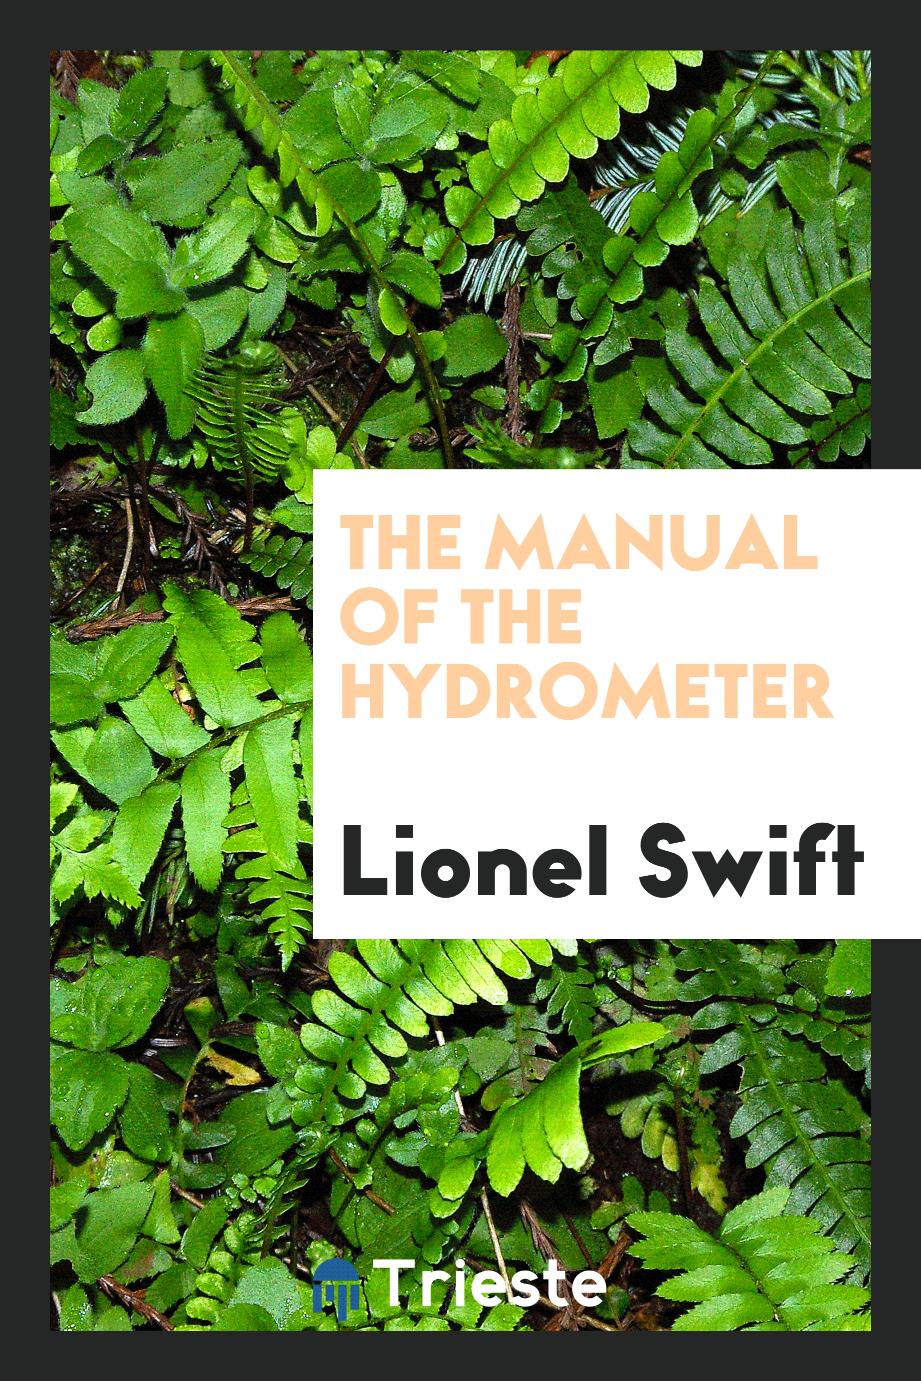 The manual of the hydrometer